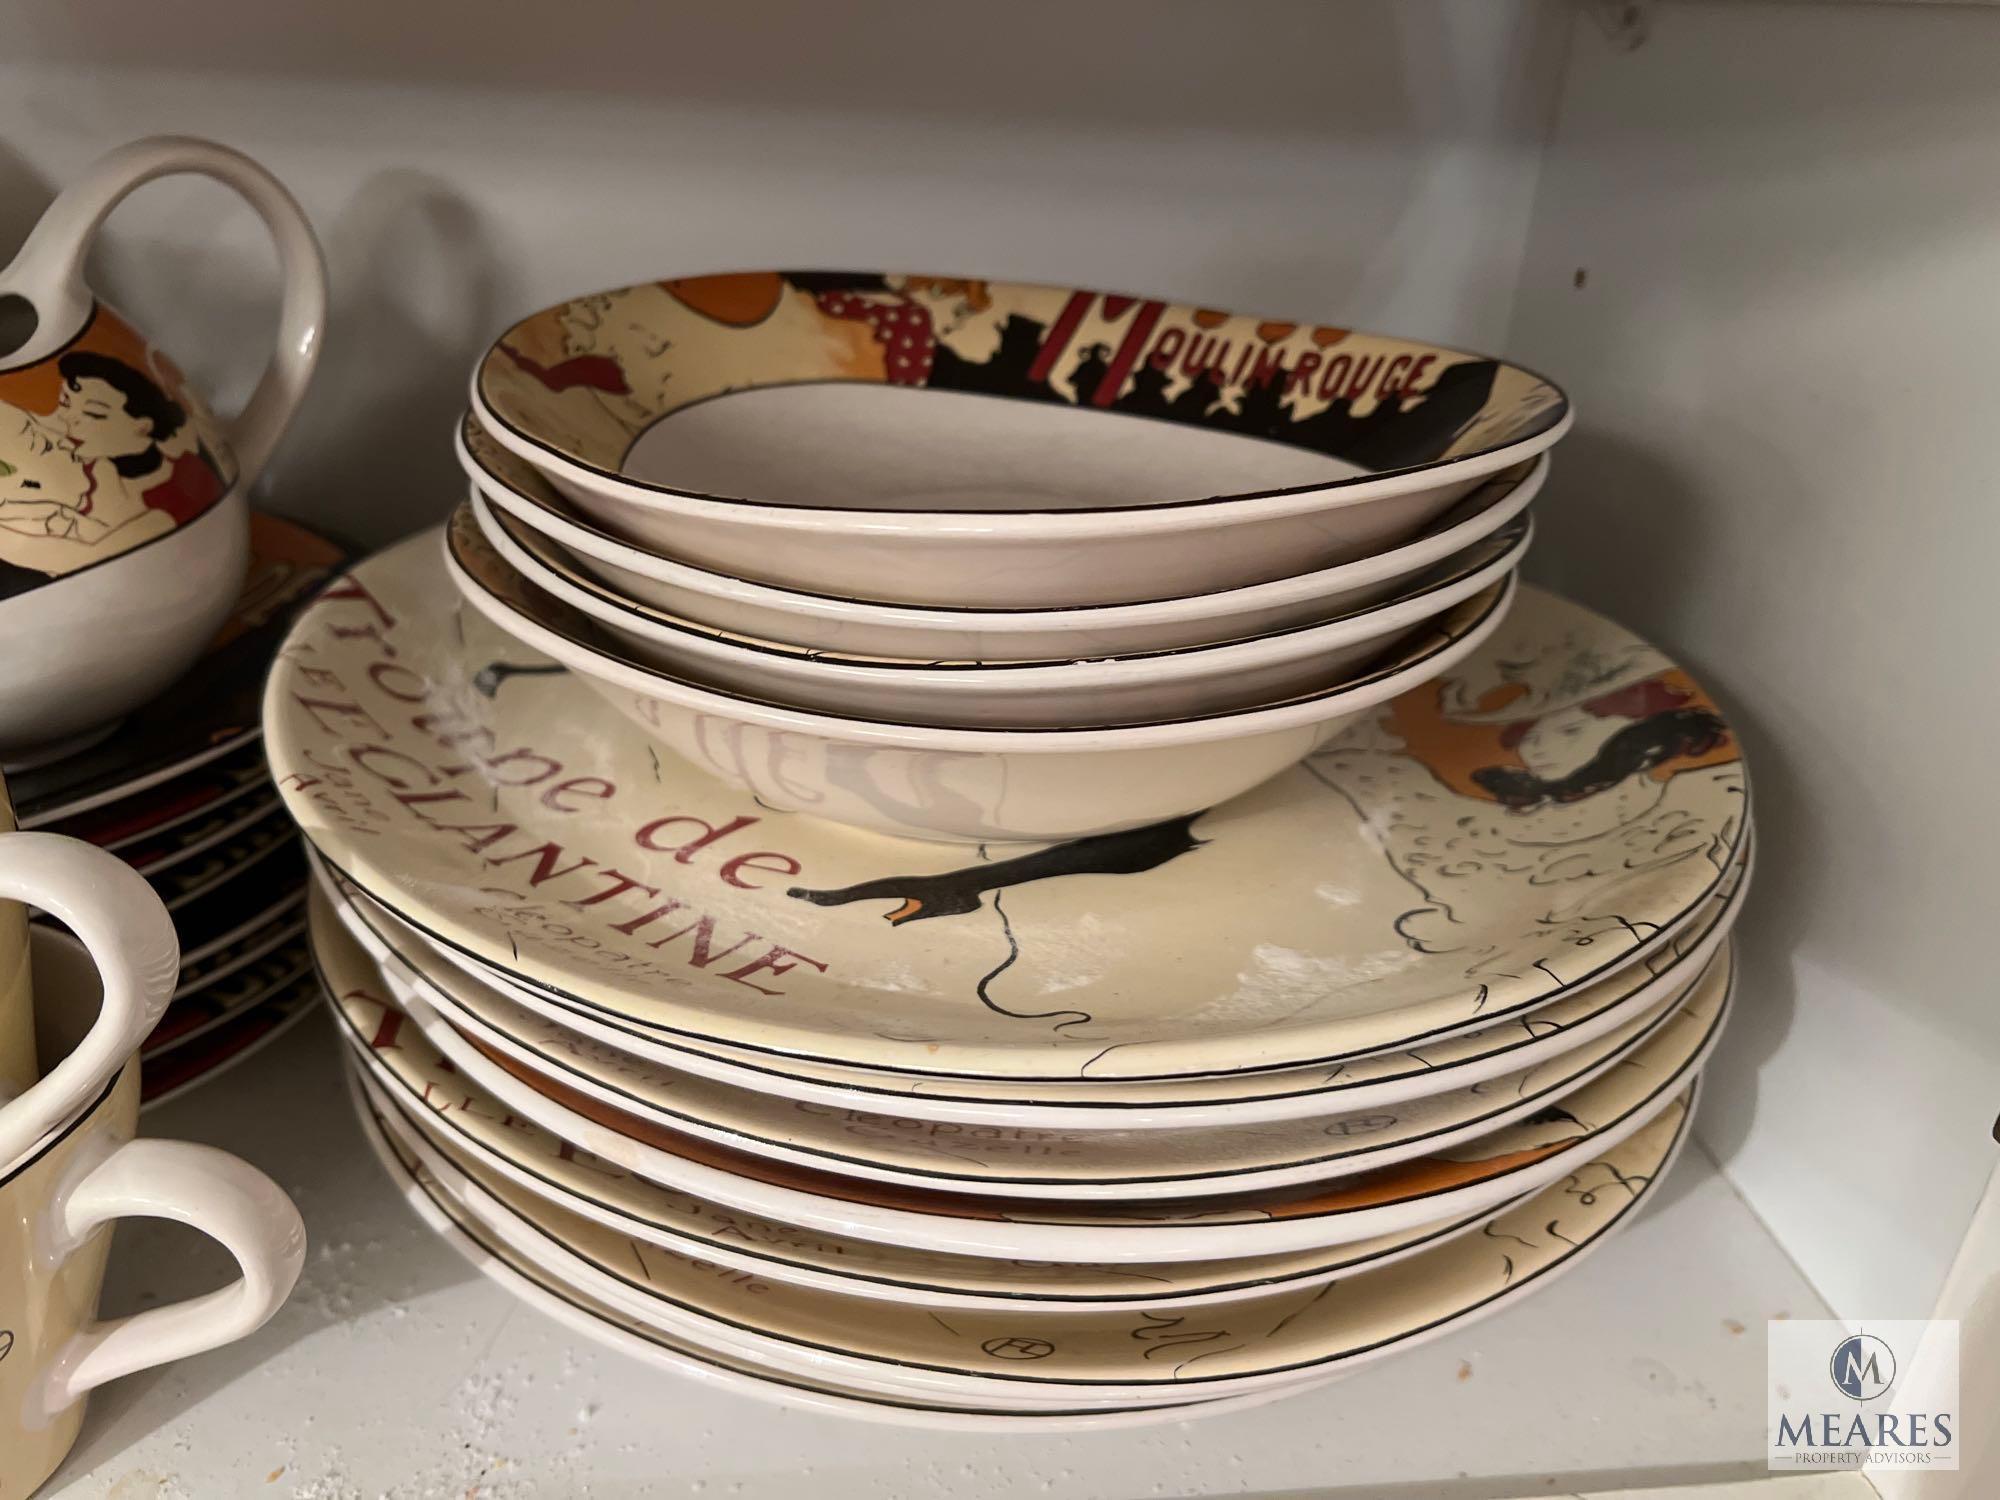 Contents of the Top of Kitchen Cabinet, Plates, Cups, Mugs